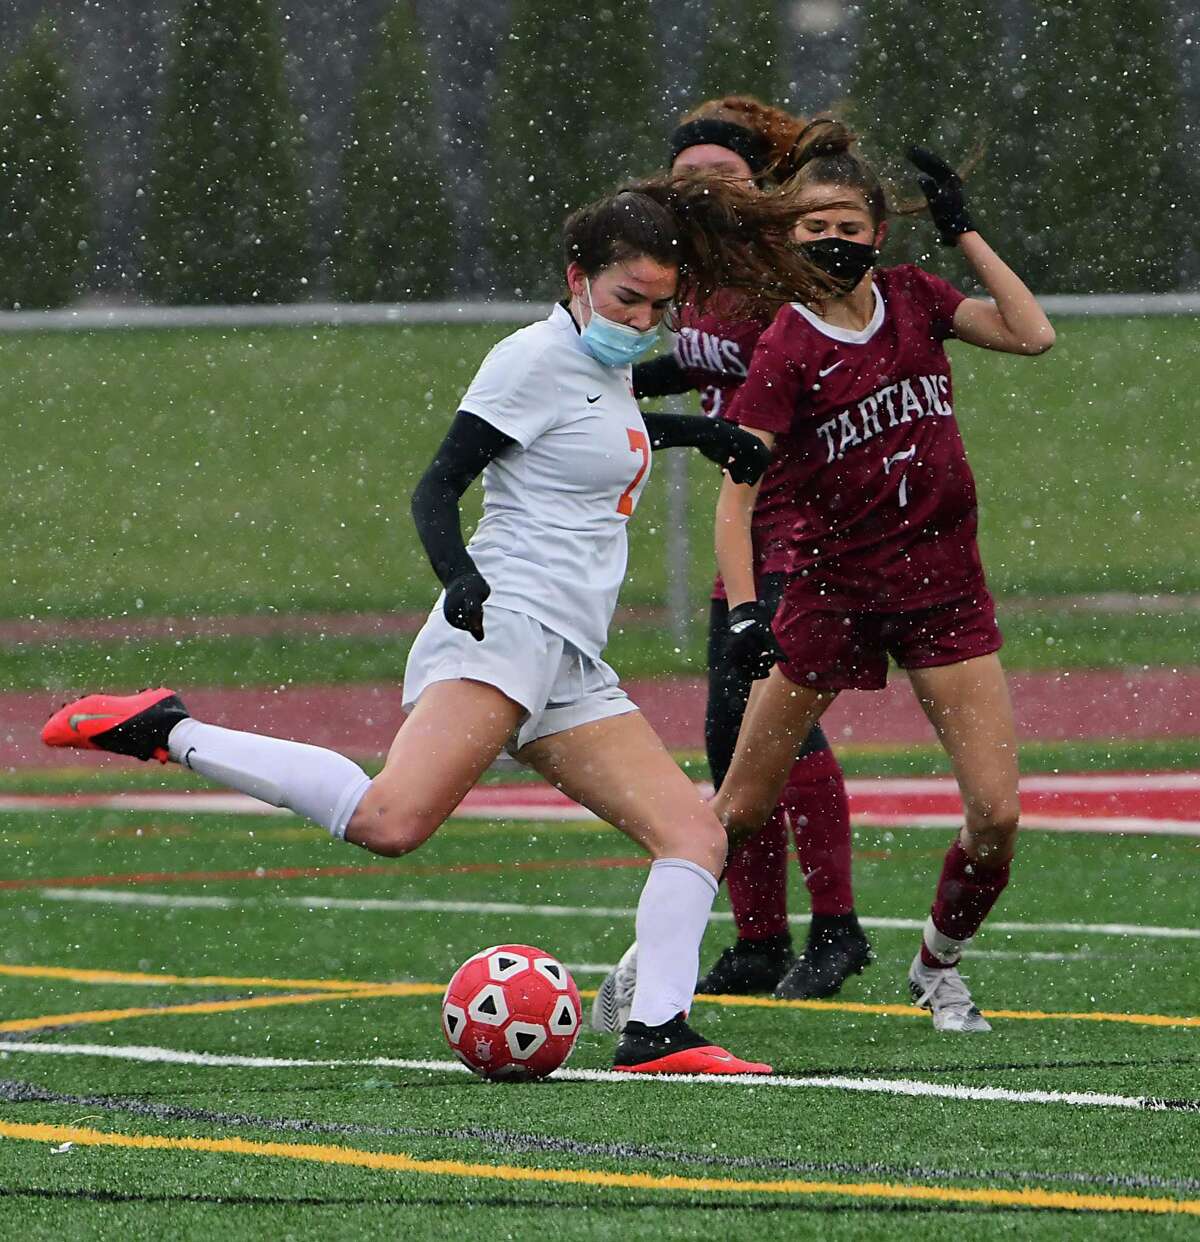 Bethlehem’s Katie Sellers scores against Scotia-Glenville during a soccer game on Wednesday, April 21, 2021 in Scotia, N.Y. (Lori Van Buren/Times Union)